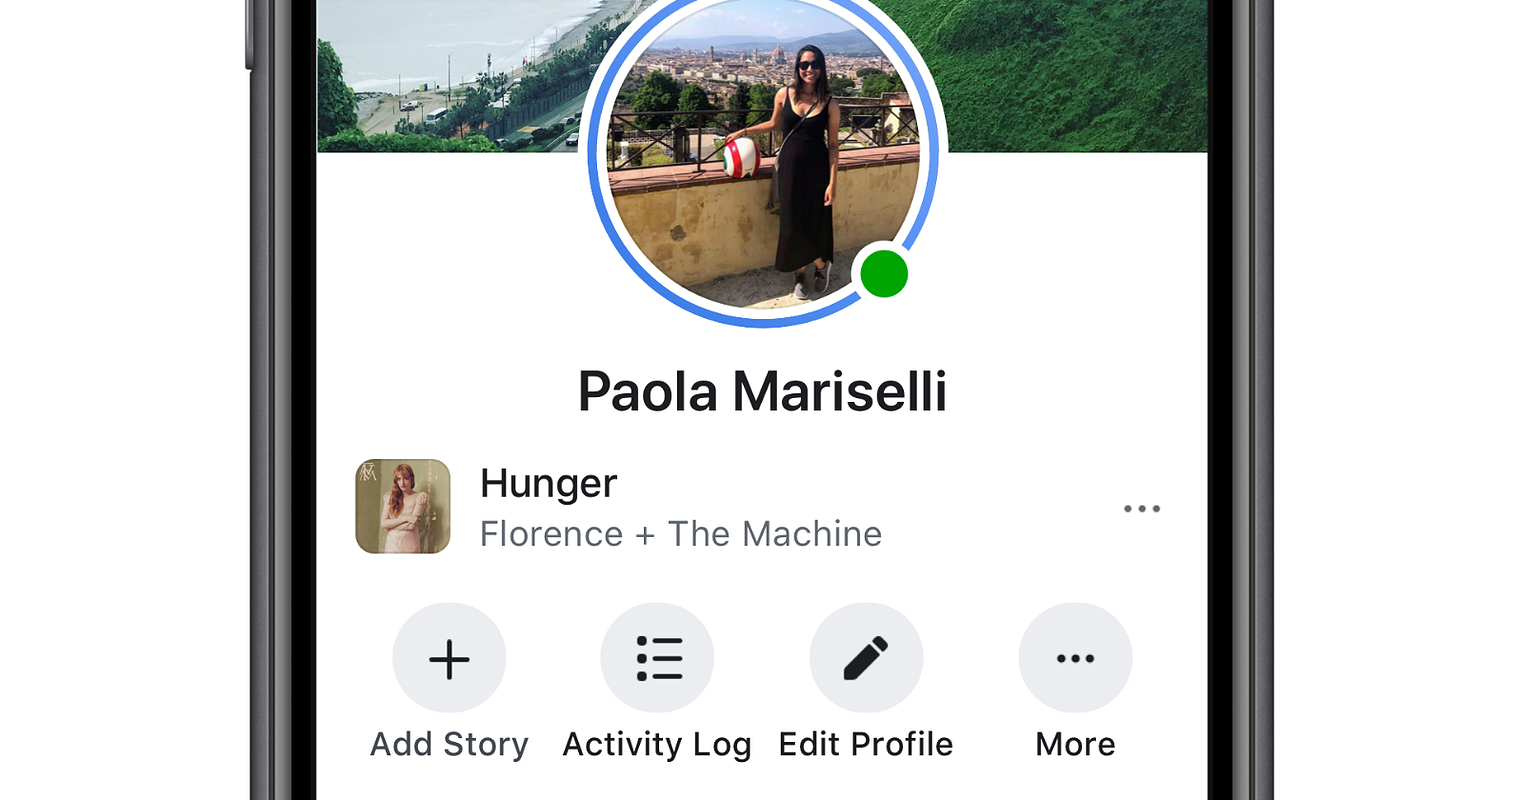 Facebook to Let Users Add Songs to Their Profile